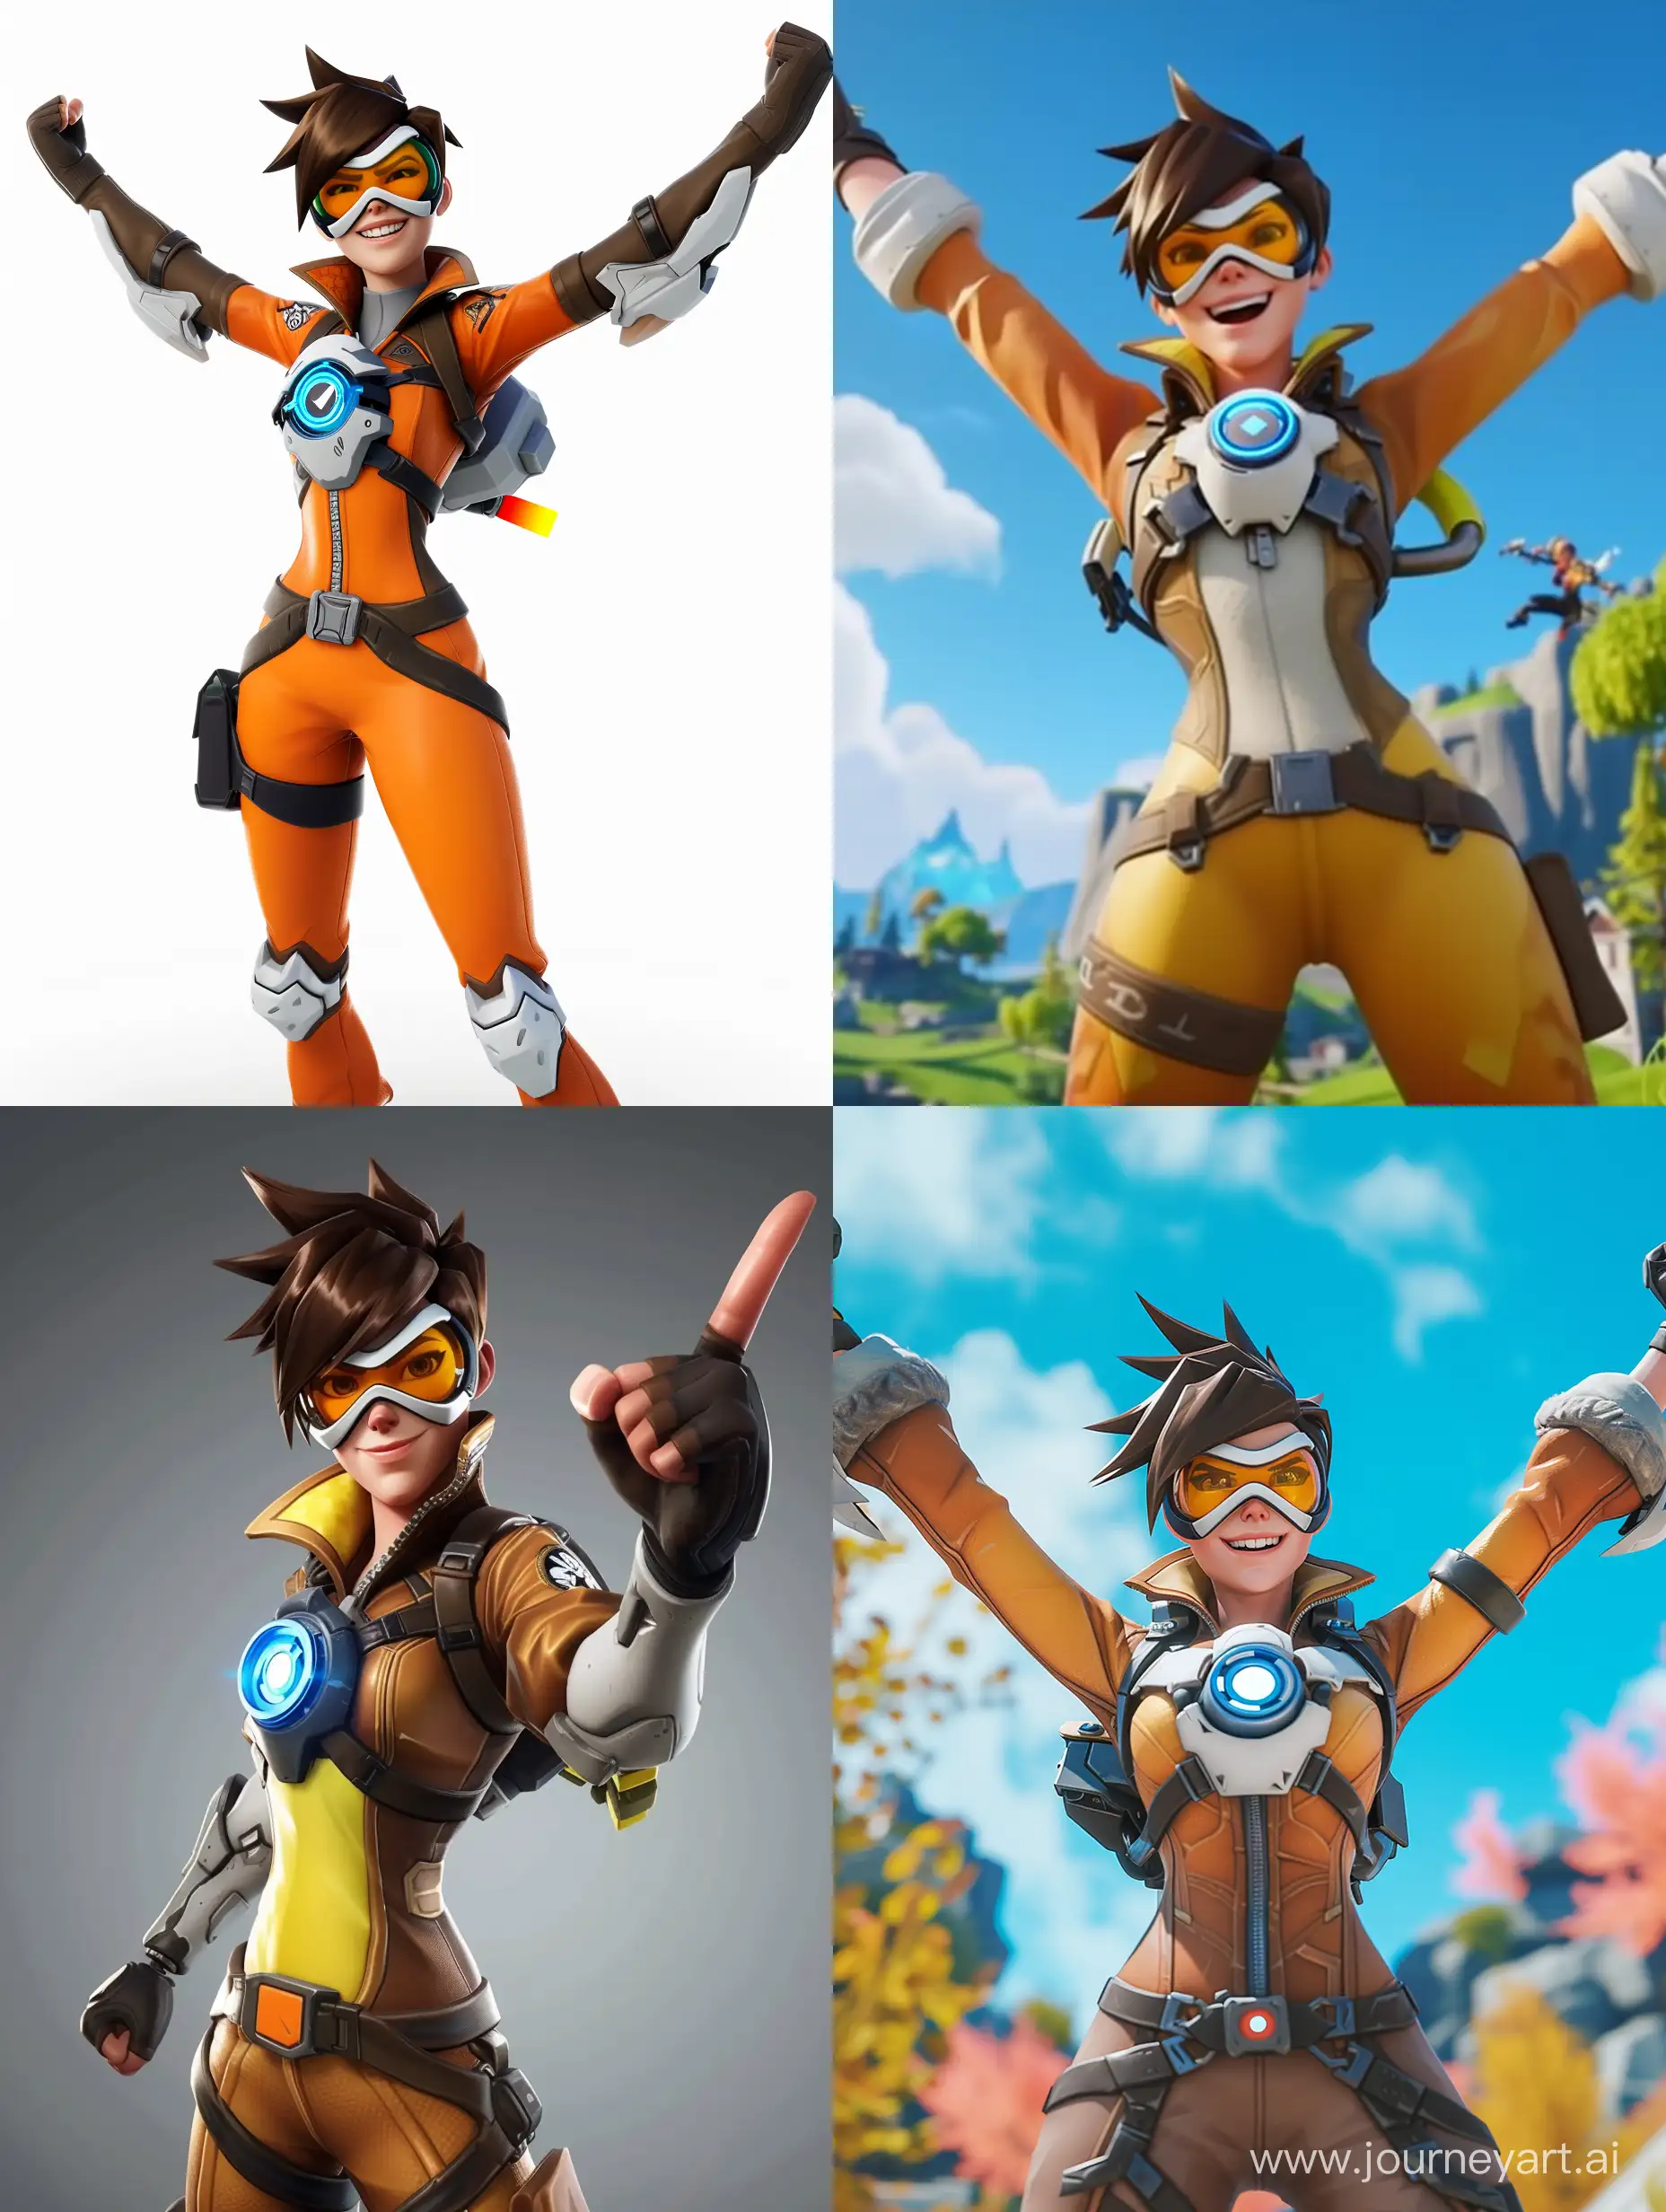 Joyful-Tracer-from-Overwatch-1-Strikes-a-Fortnite-Victory-Pose